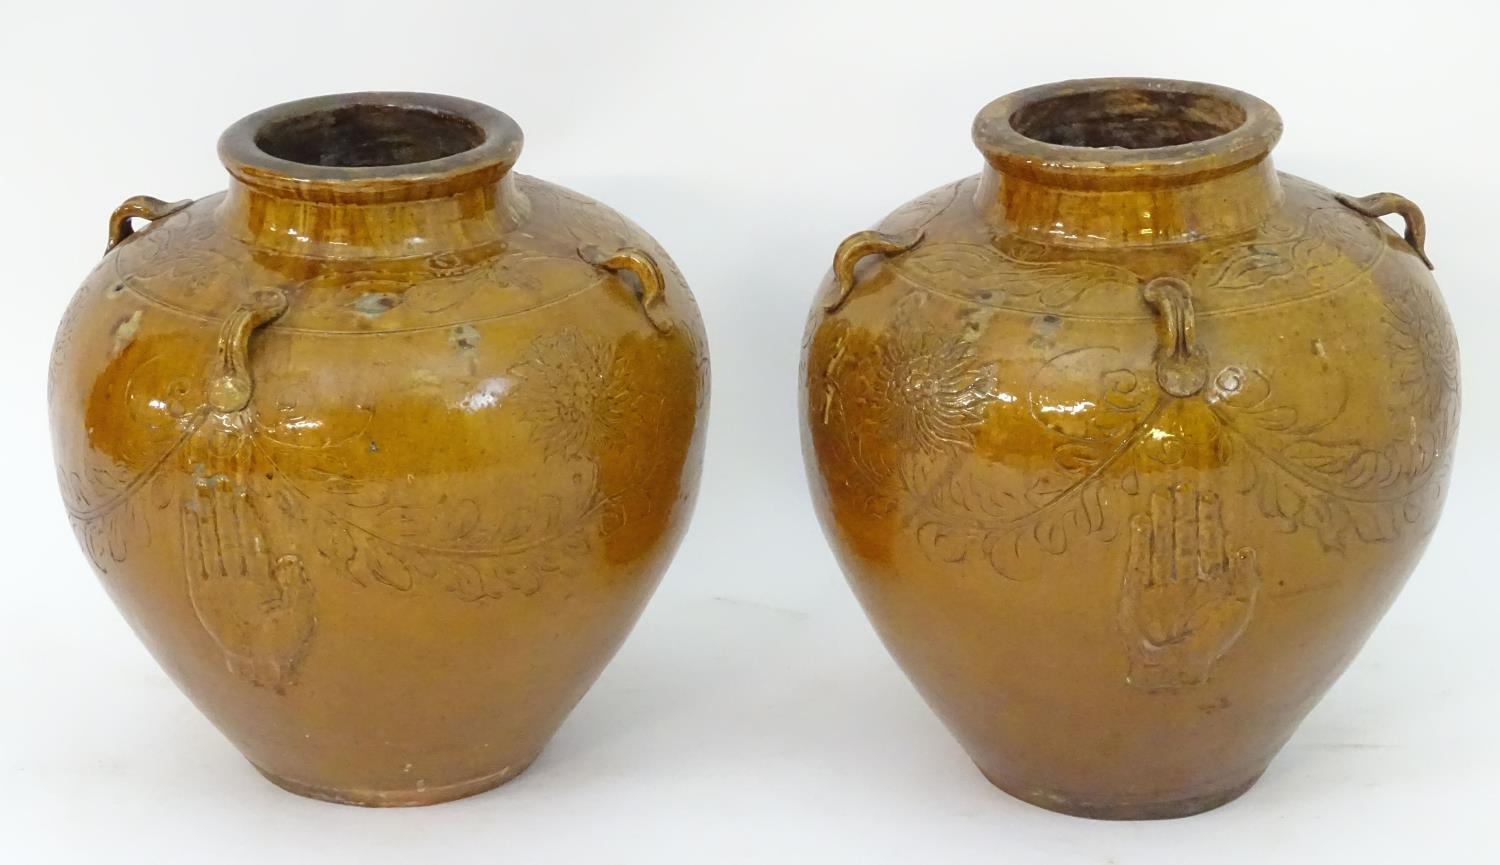 A pair of large Chinese earthenware salt glaze vases with applied handles and incised decoration